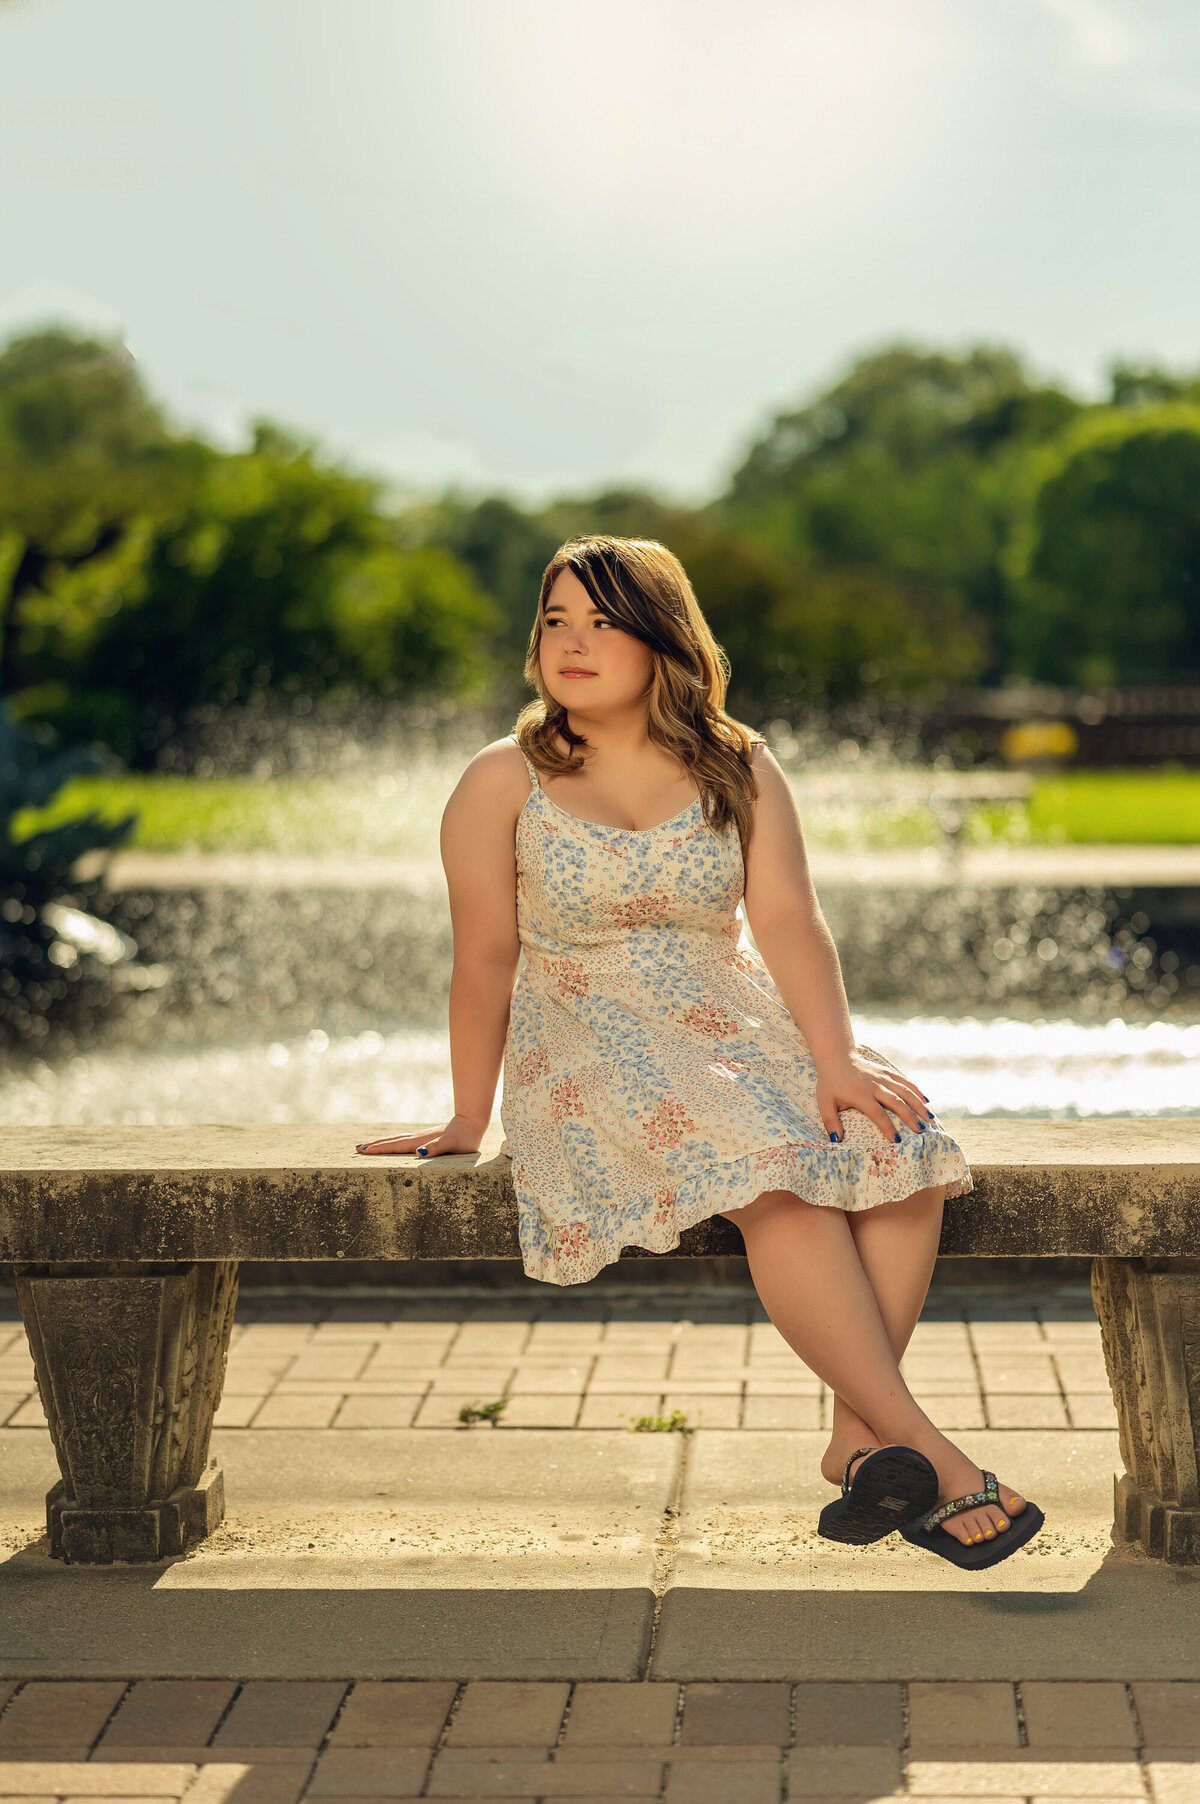 A girl from Pewaukee High School takes a break on a bench in Eagle's Paradise Springs during her senior photo session.